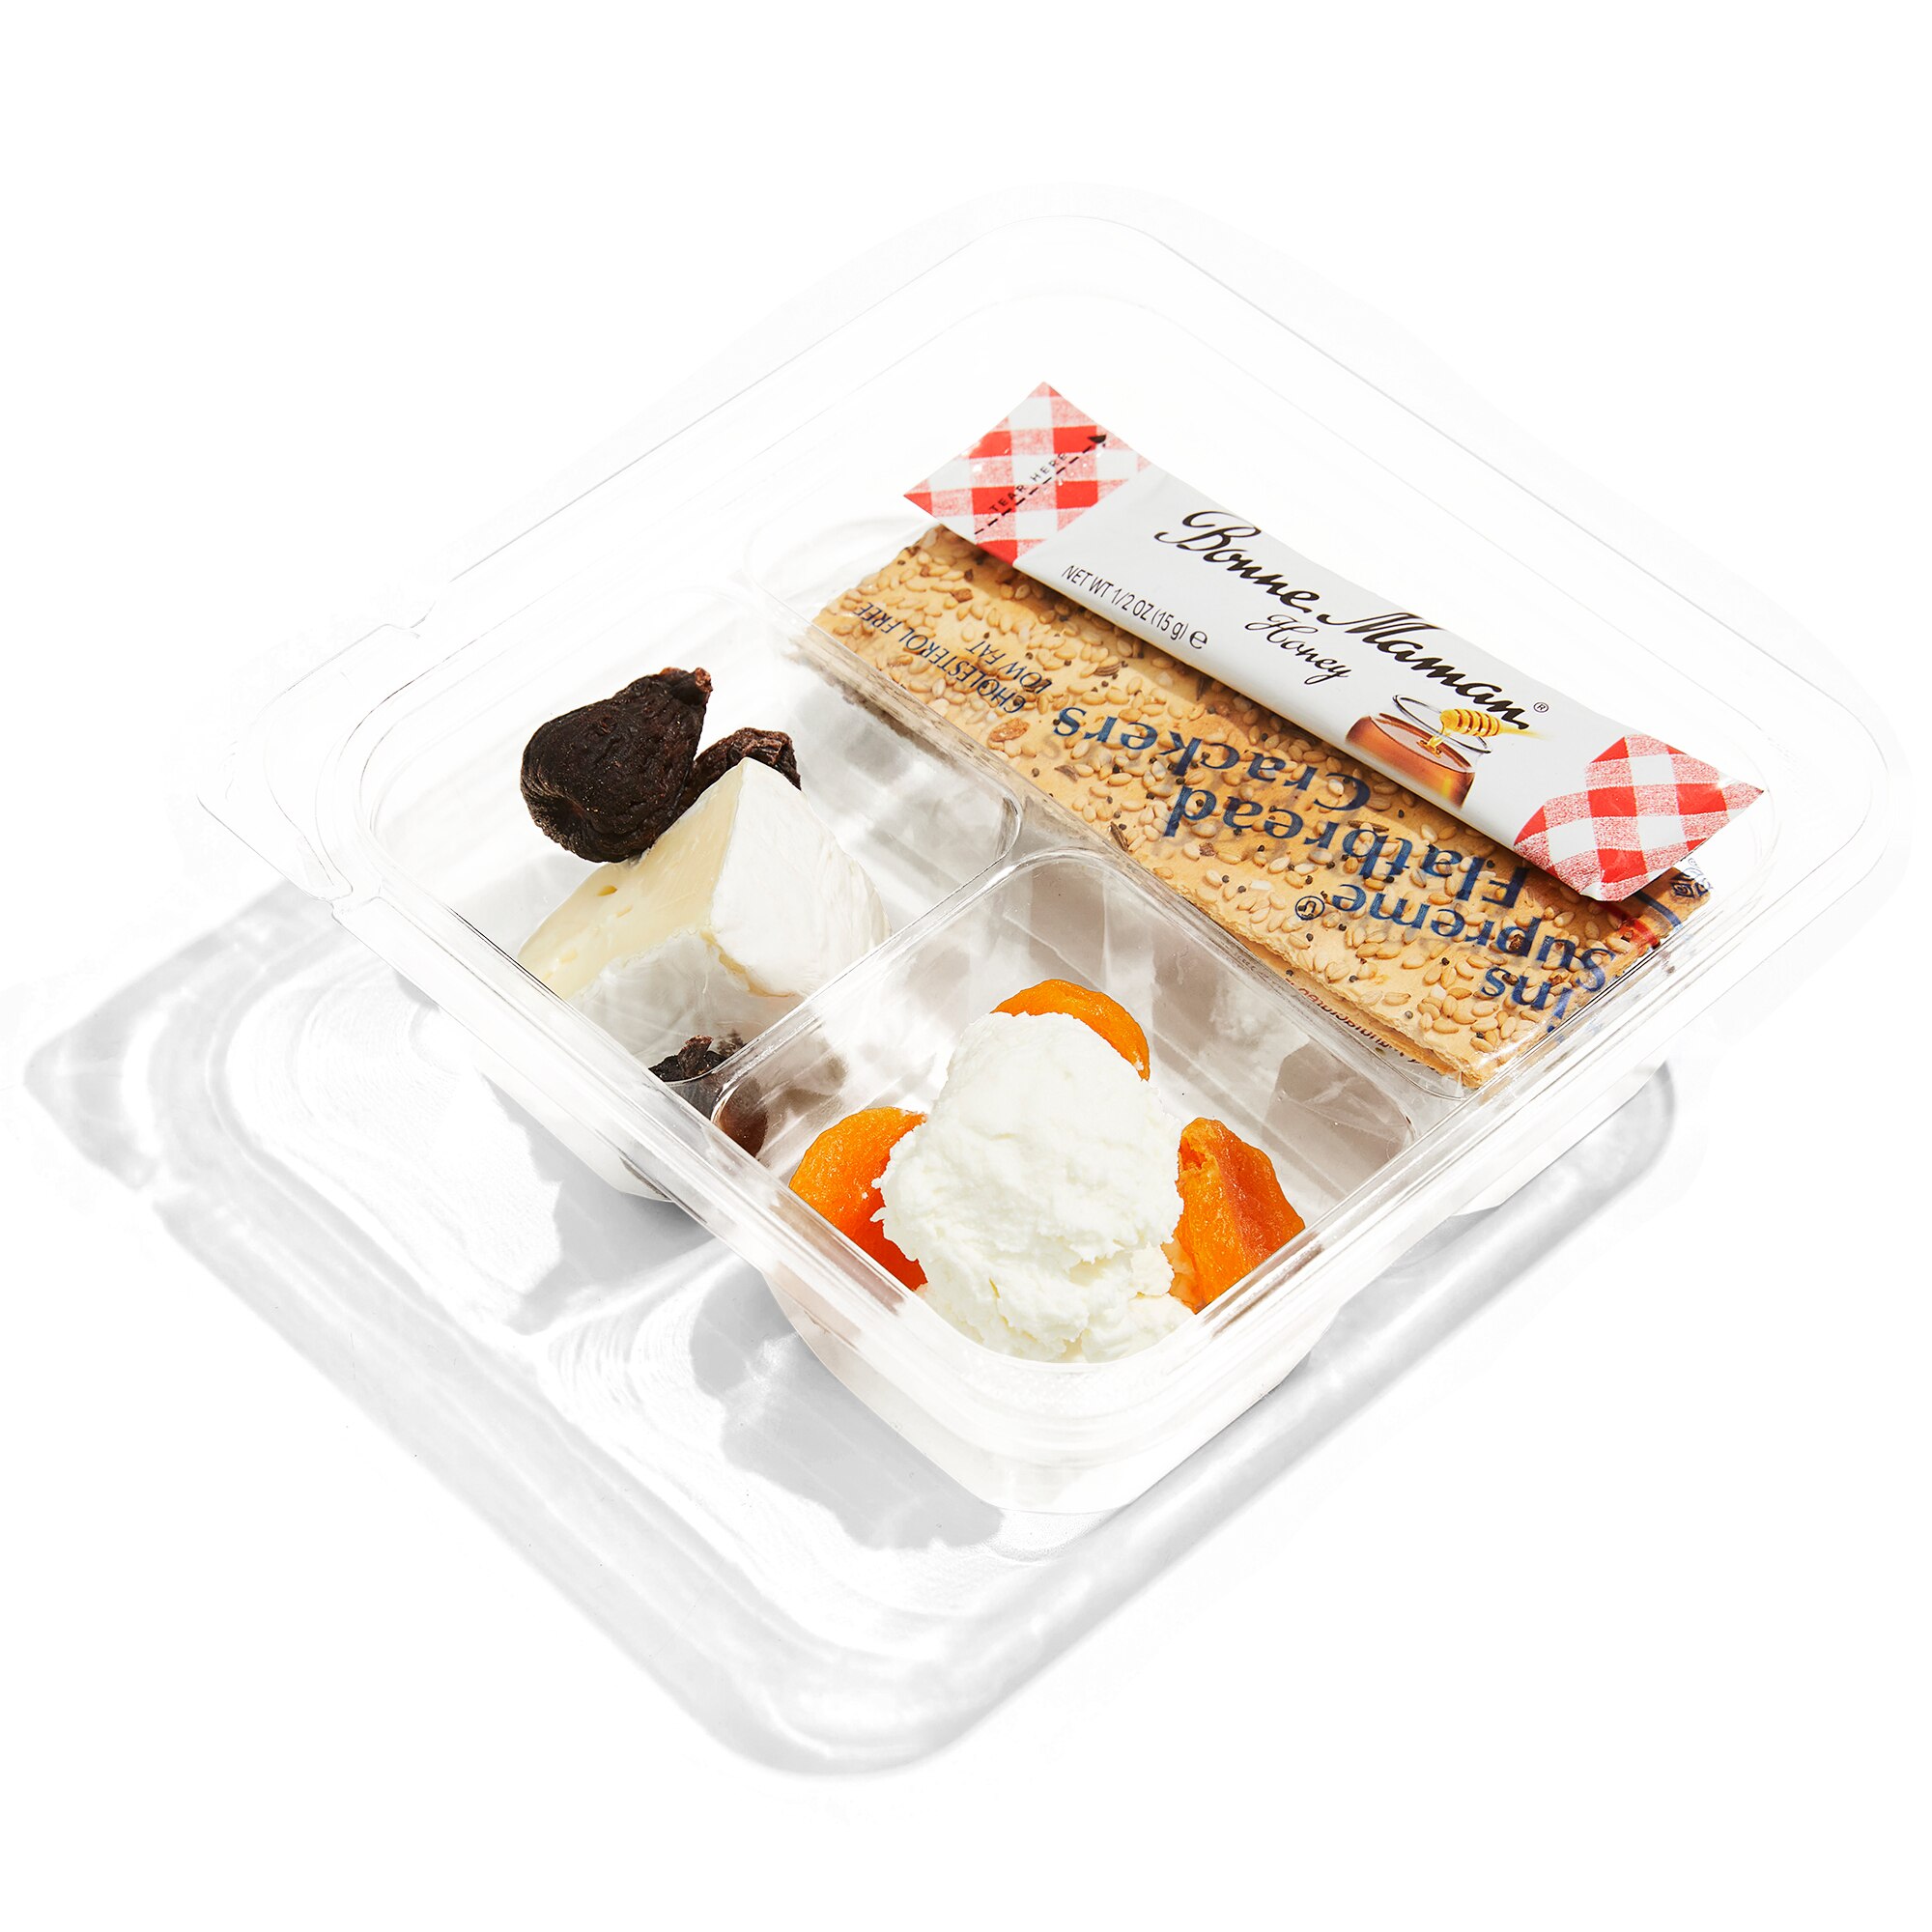 Everytable, Brie & Fig Snack Box, 4 oz